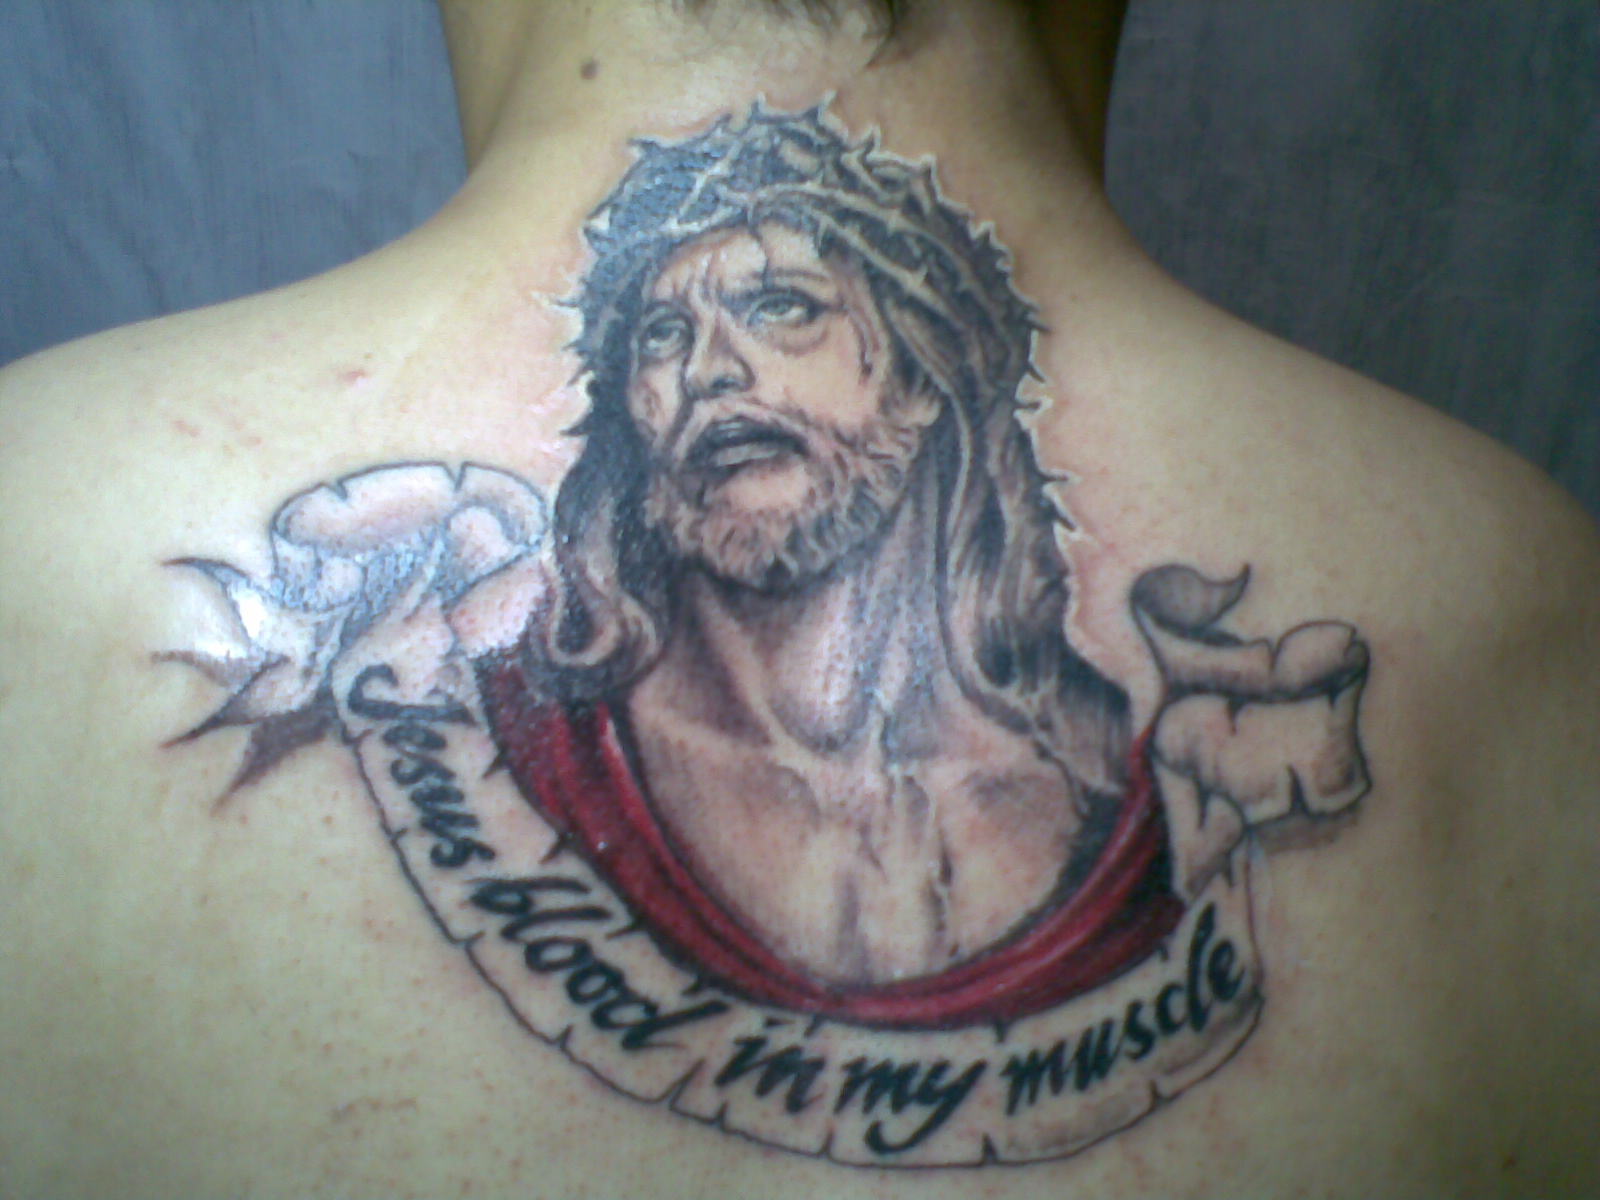 http://images2.fanpop.com/image/photos/9100000/jesus-blood-in-my-muscle-tattoos-9170908-1600-1200.jpg